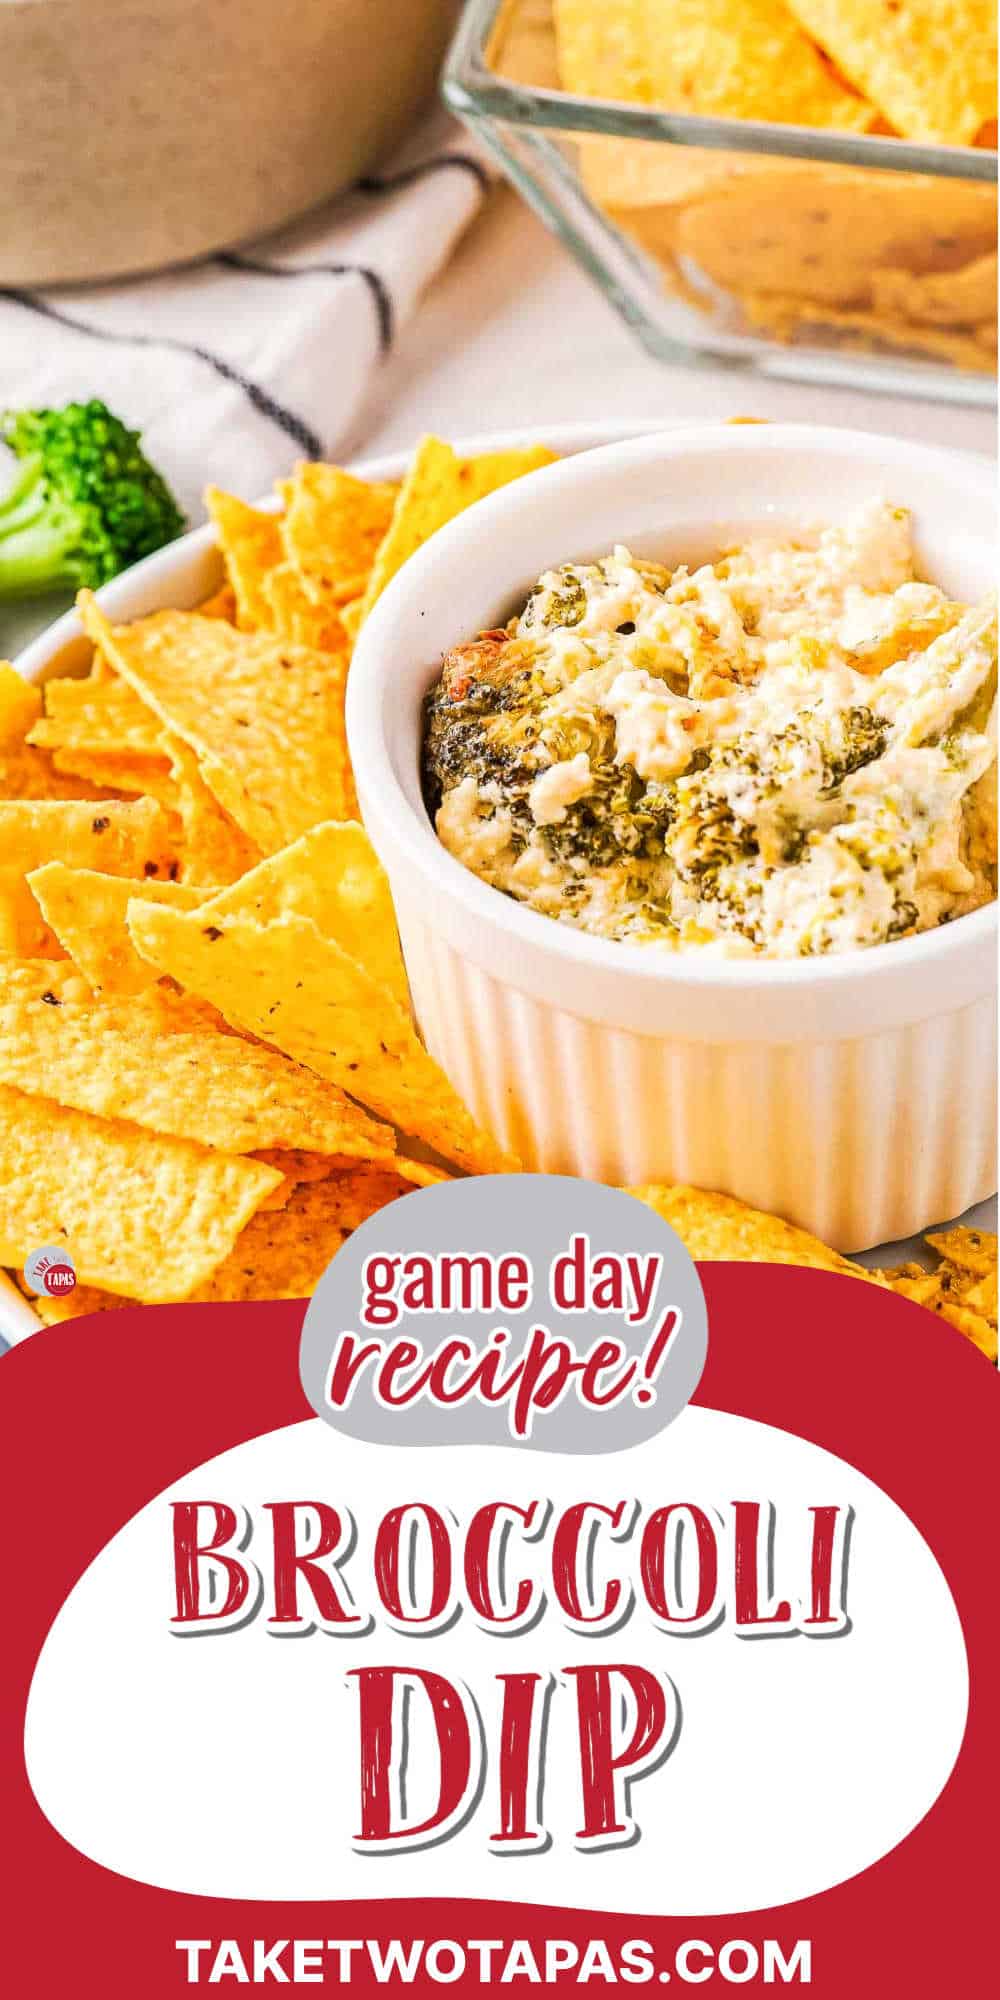 cheesy broccoli dip with red banner and white text